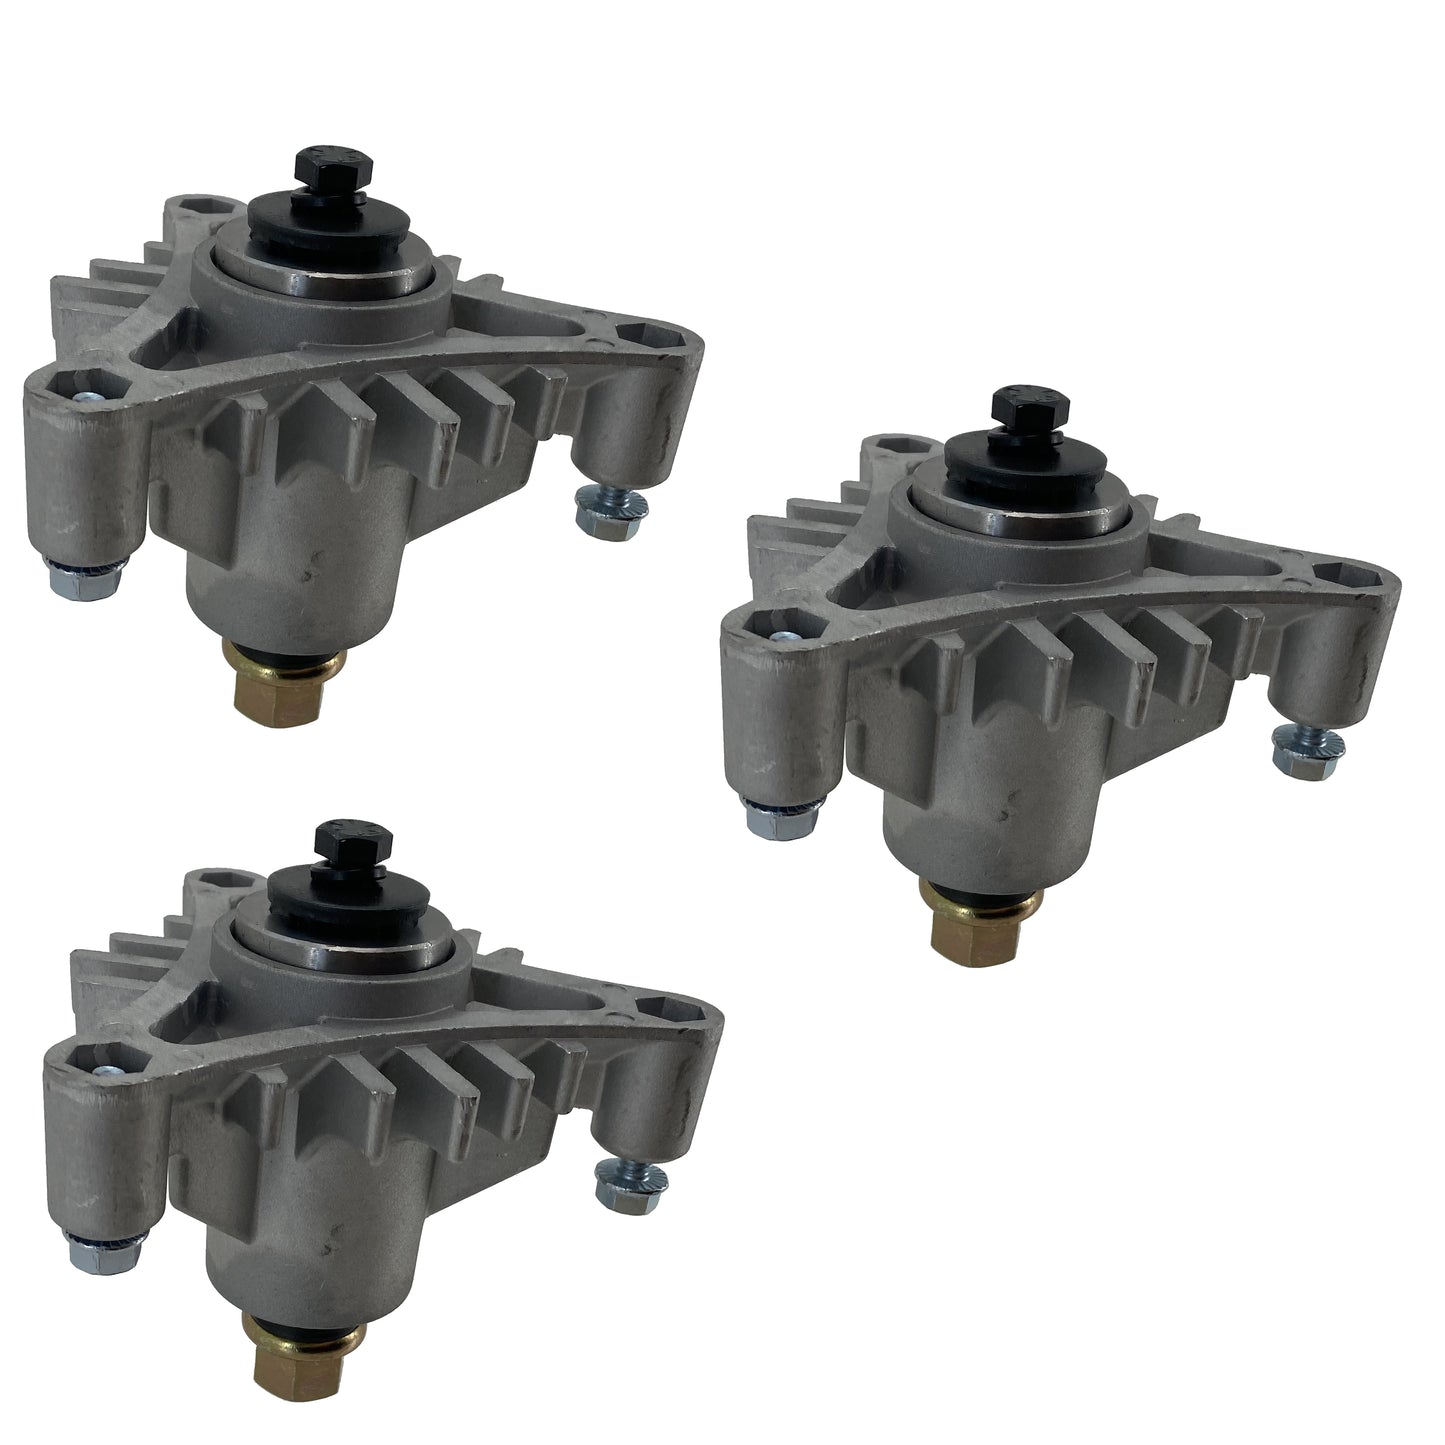 Sunbelt Products Spindle 3 Pack - B1AY25,3